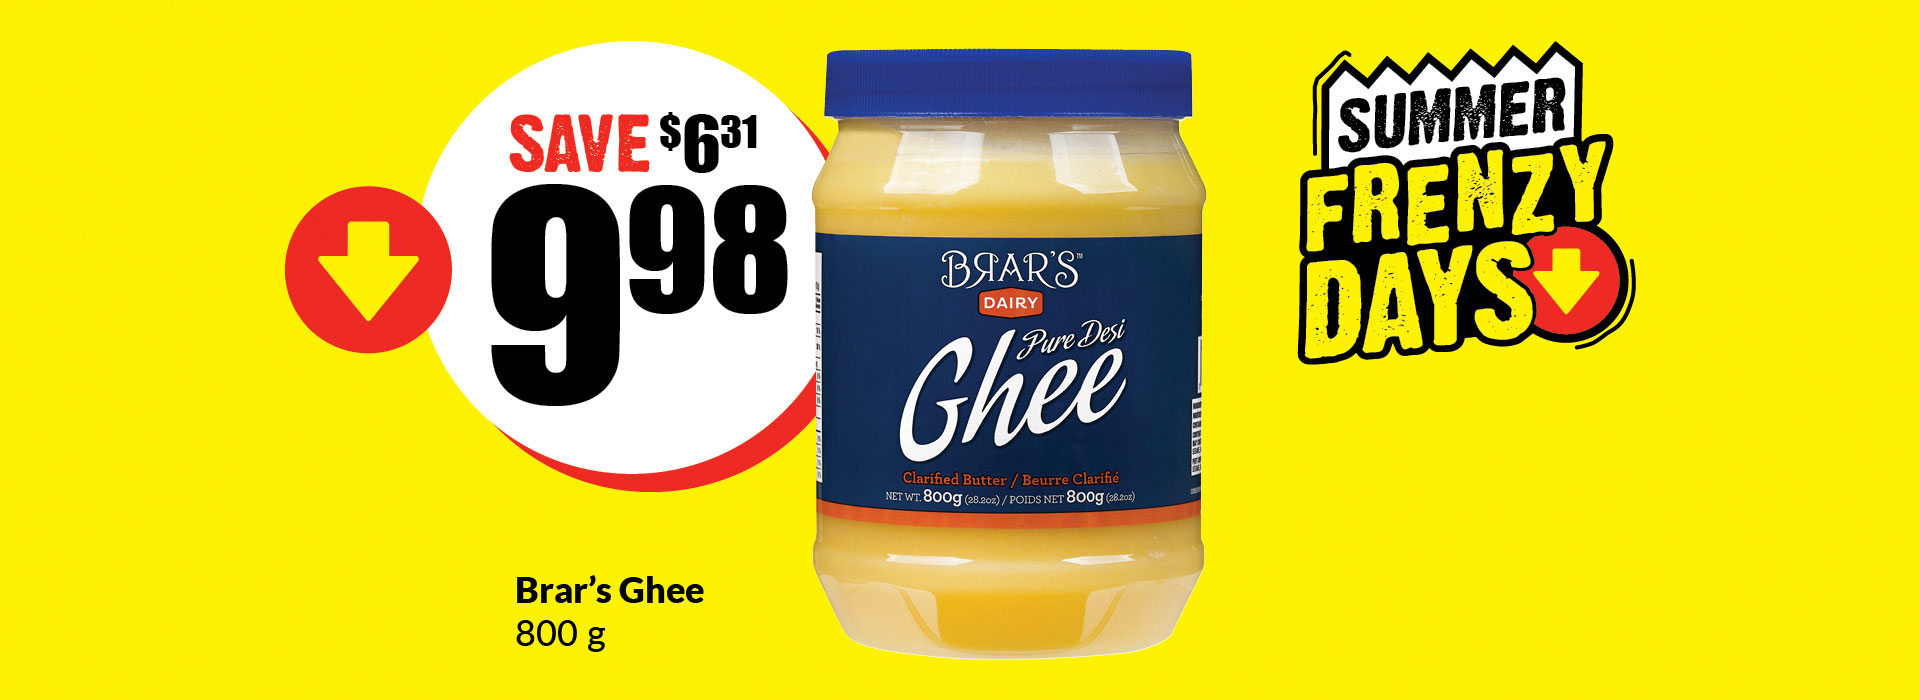 Text Reading 'Buy Brar's Ghee (800g) for $9.98 and save $6.31.'